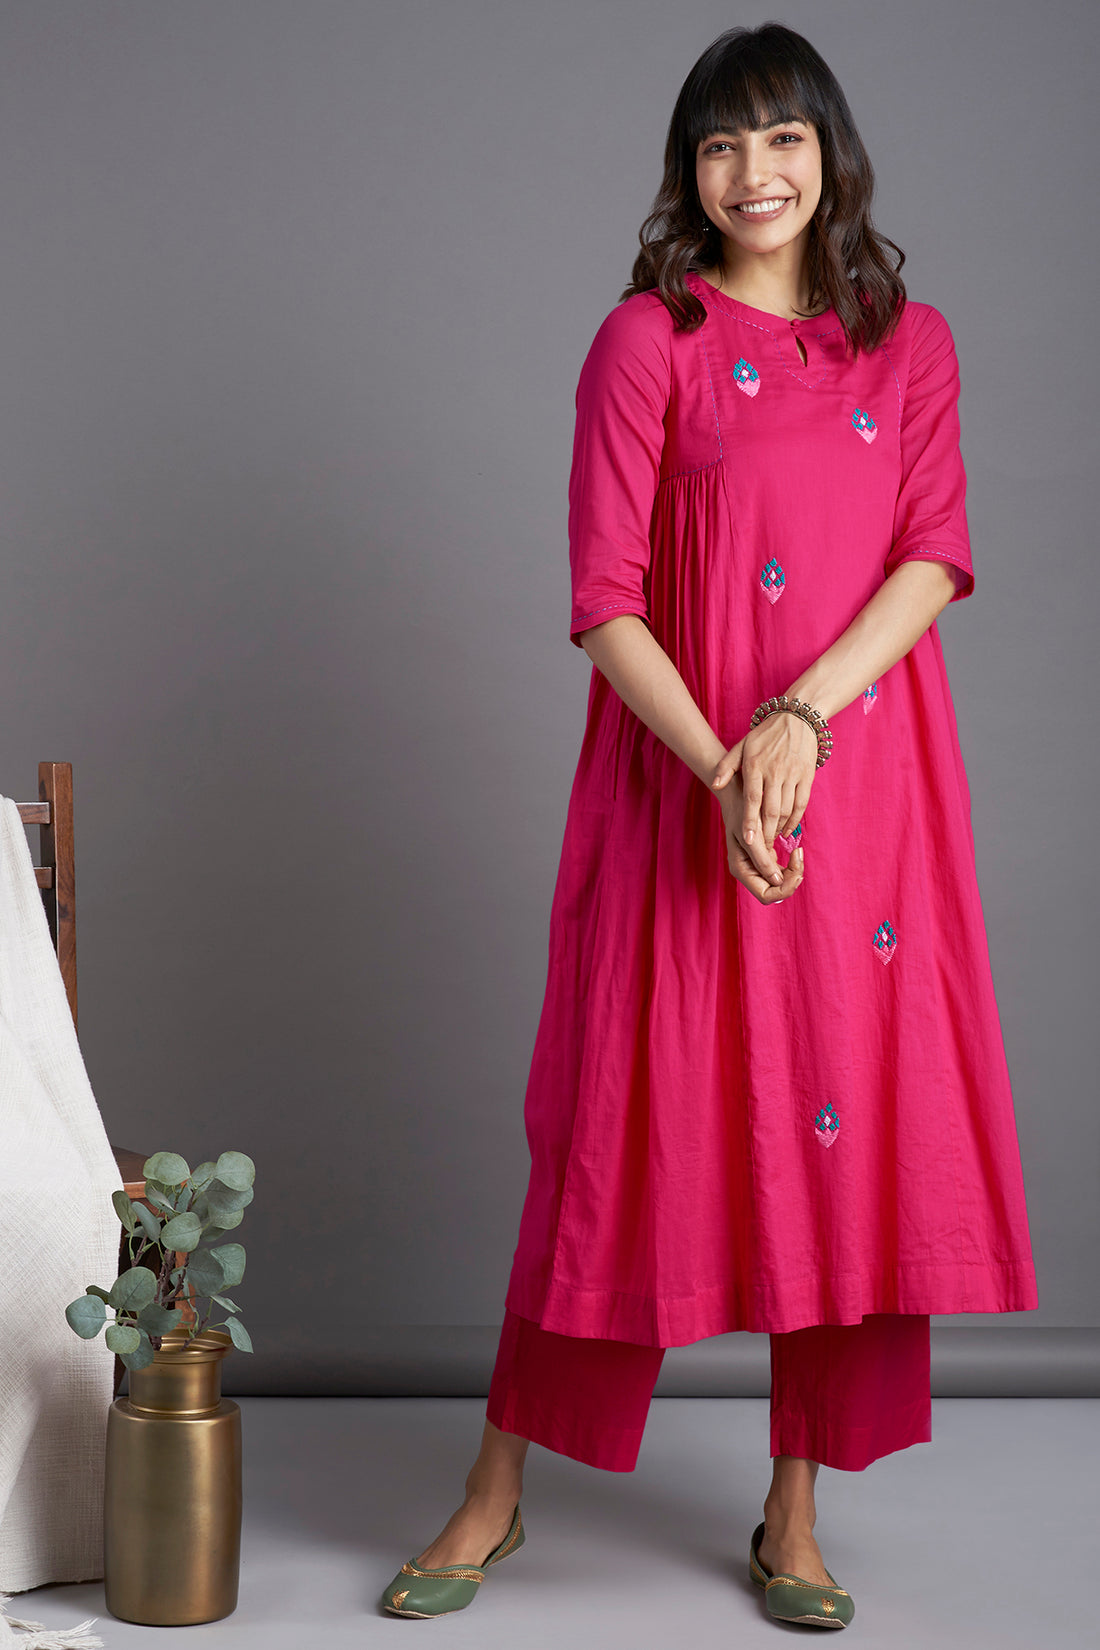 Rani pink mul cotton gather kurta with lining and pockets with delicate tulip hand embroidery in green and peach and with coordinated pants